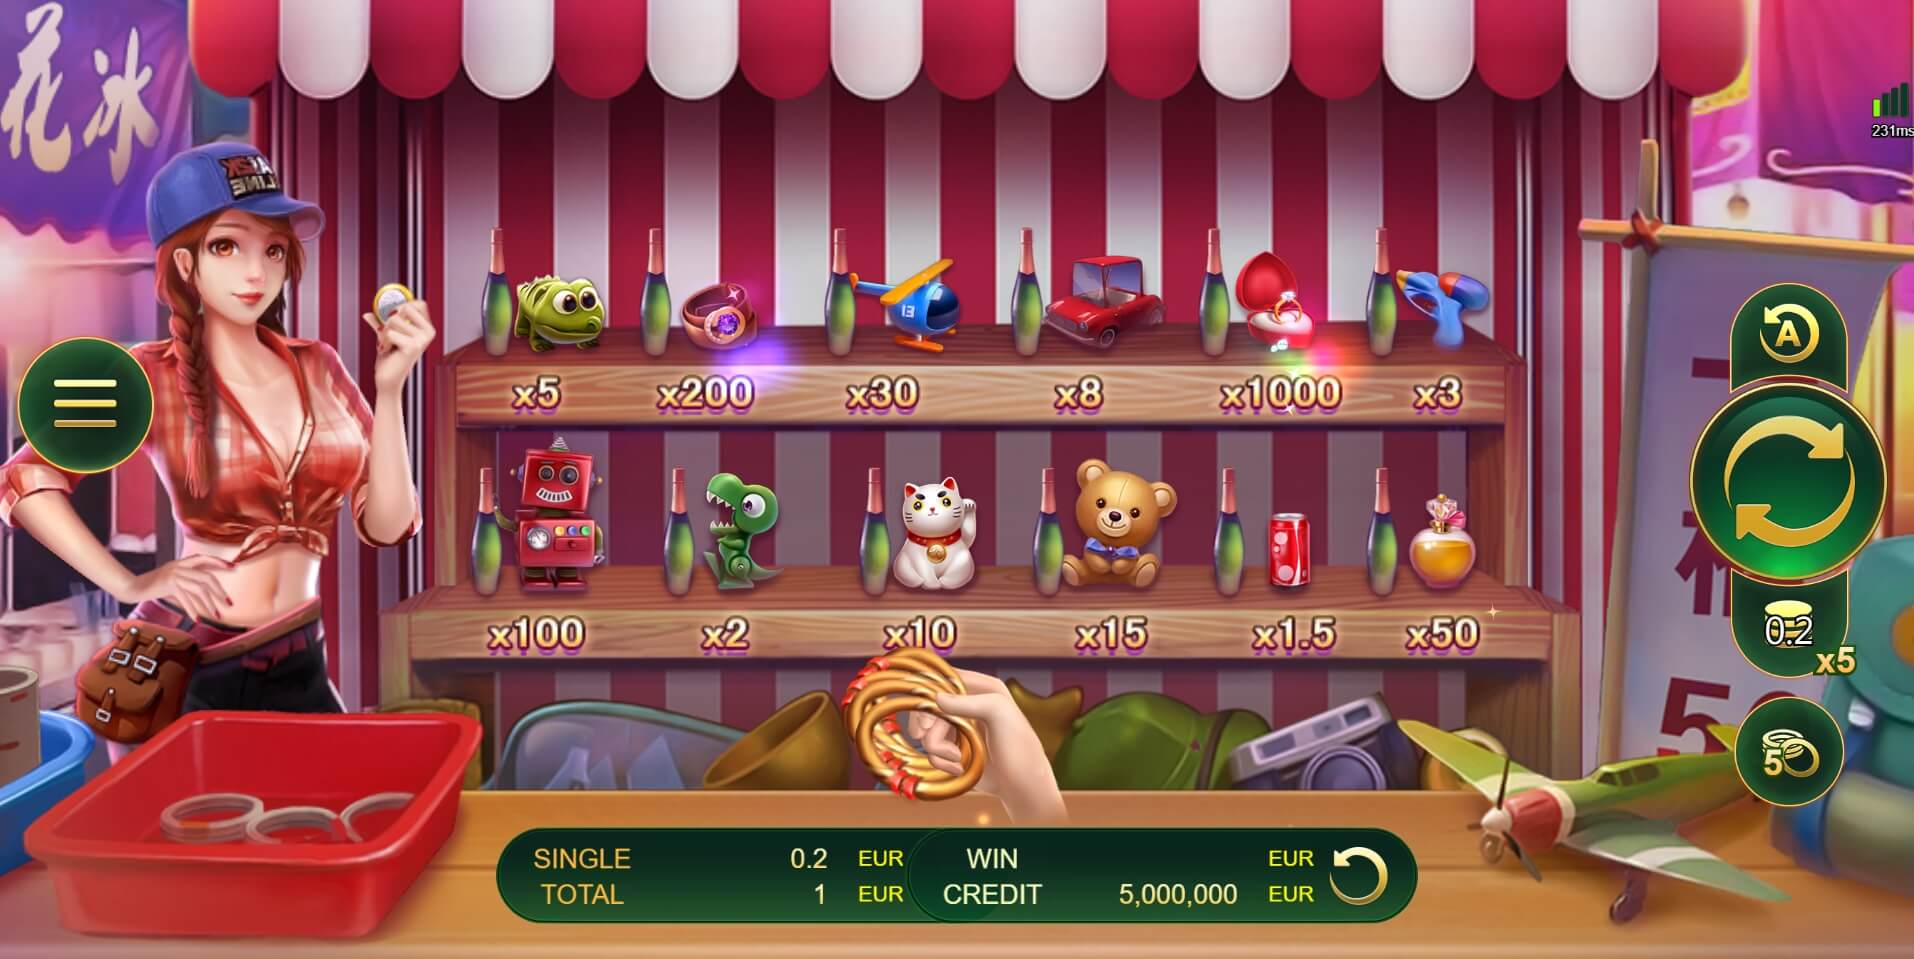 Win the Ring Gioco Plus superslot เครดิตฟรี 50